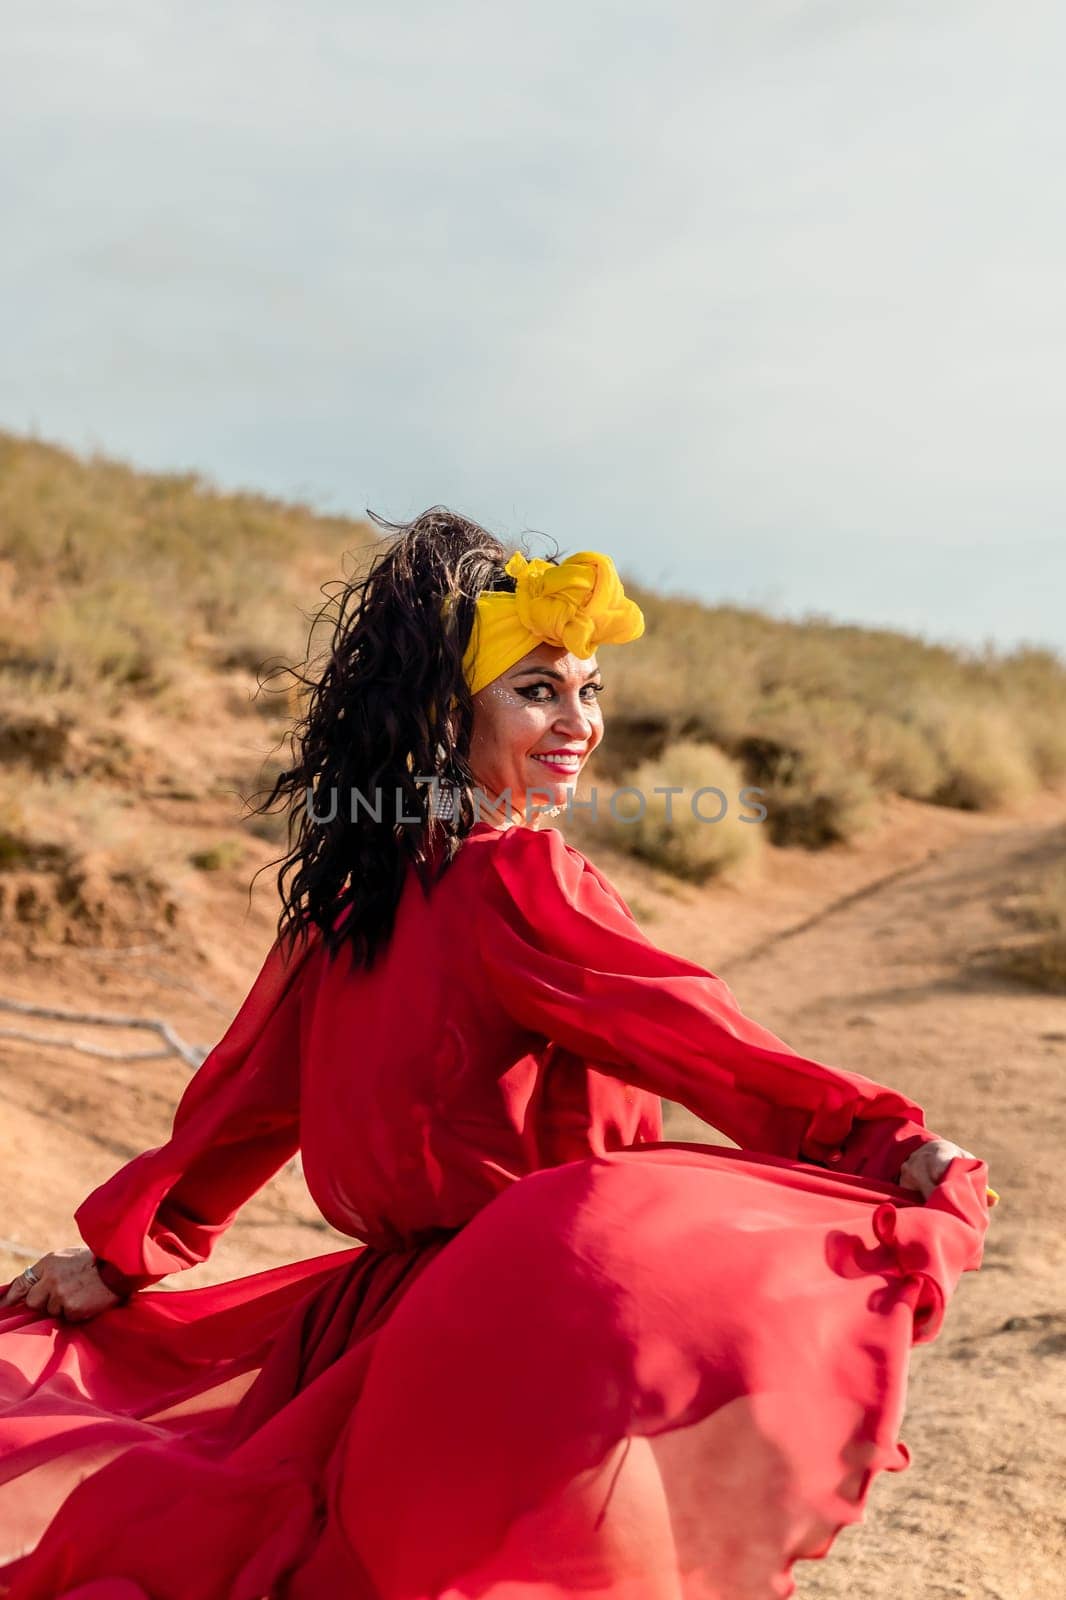 A woman in a red dress and yellow headband is walking on a dirt path. She is smiling and she is happy